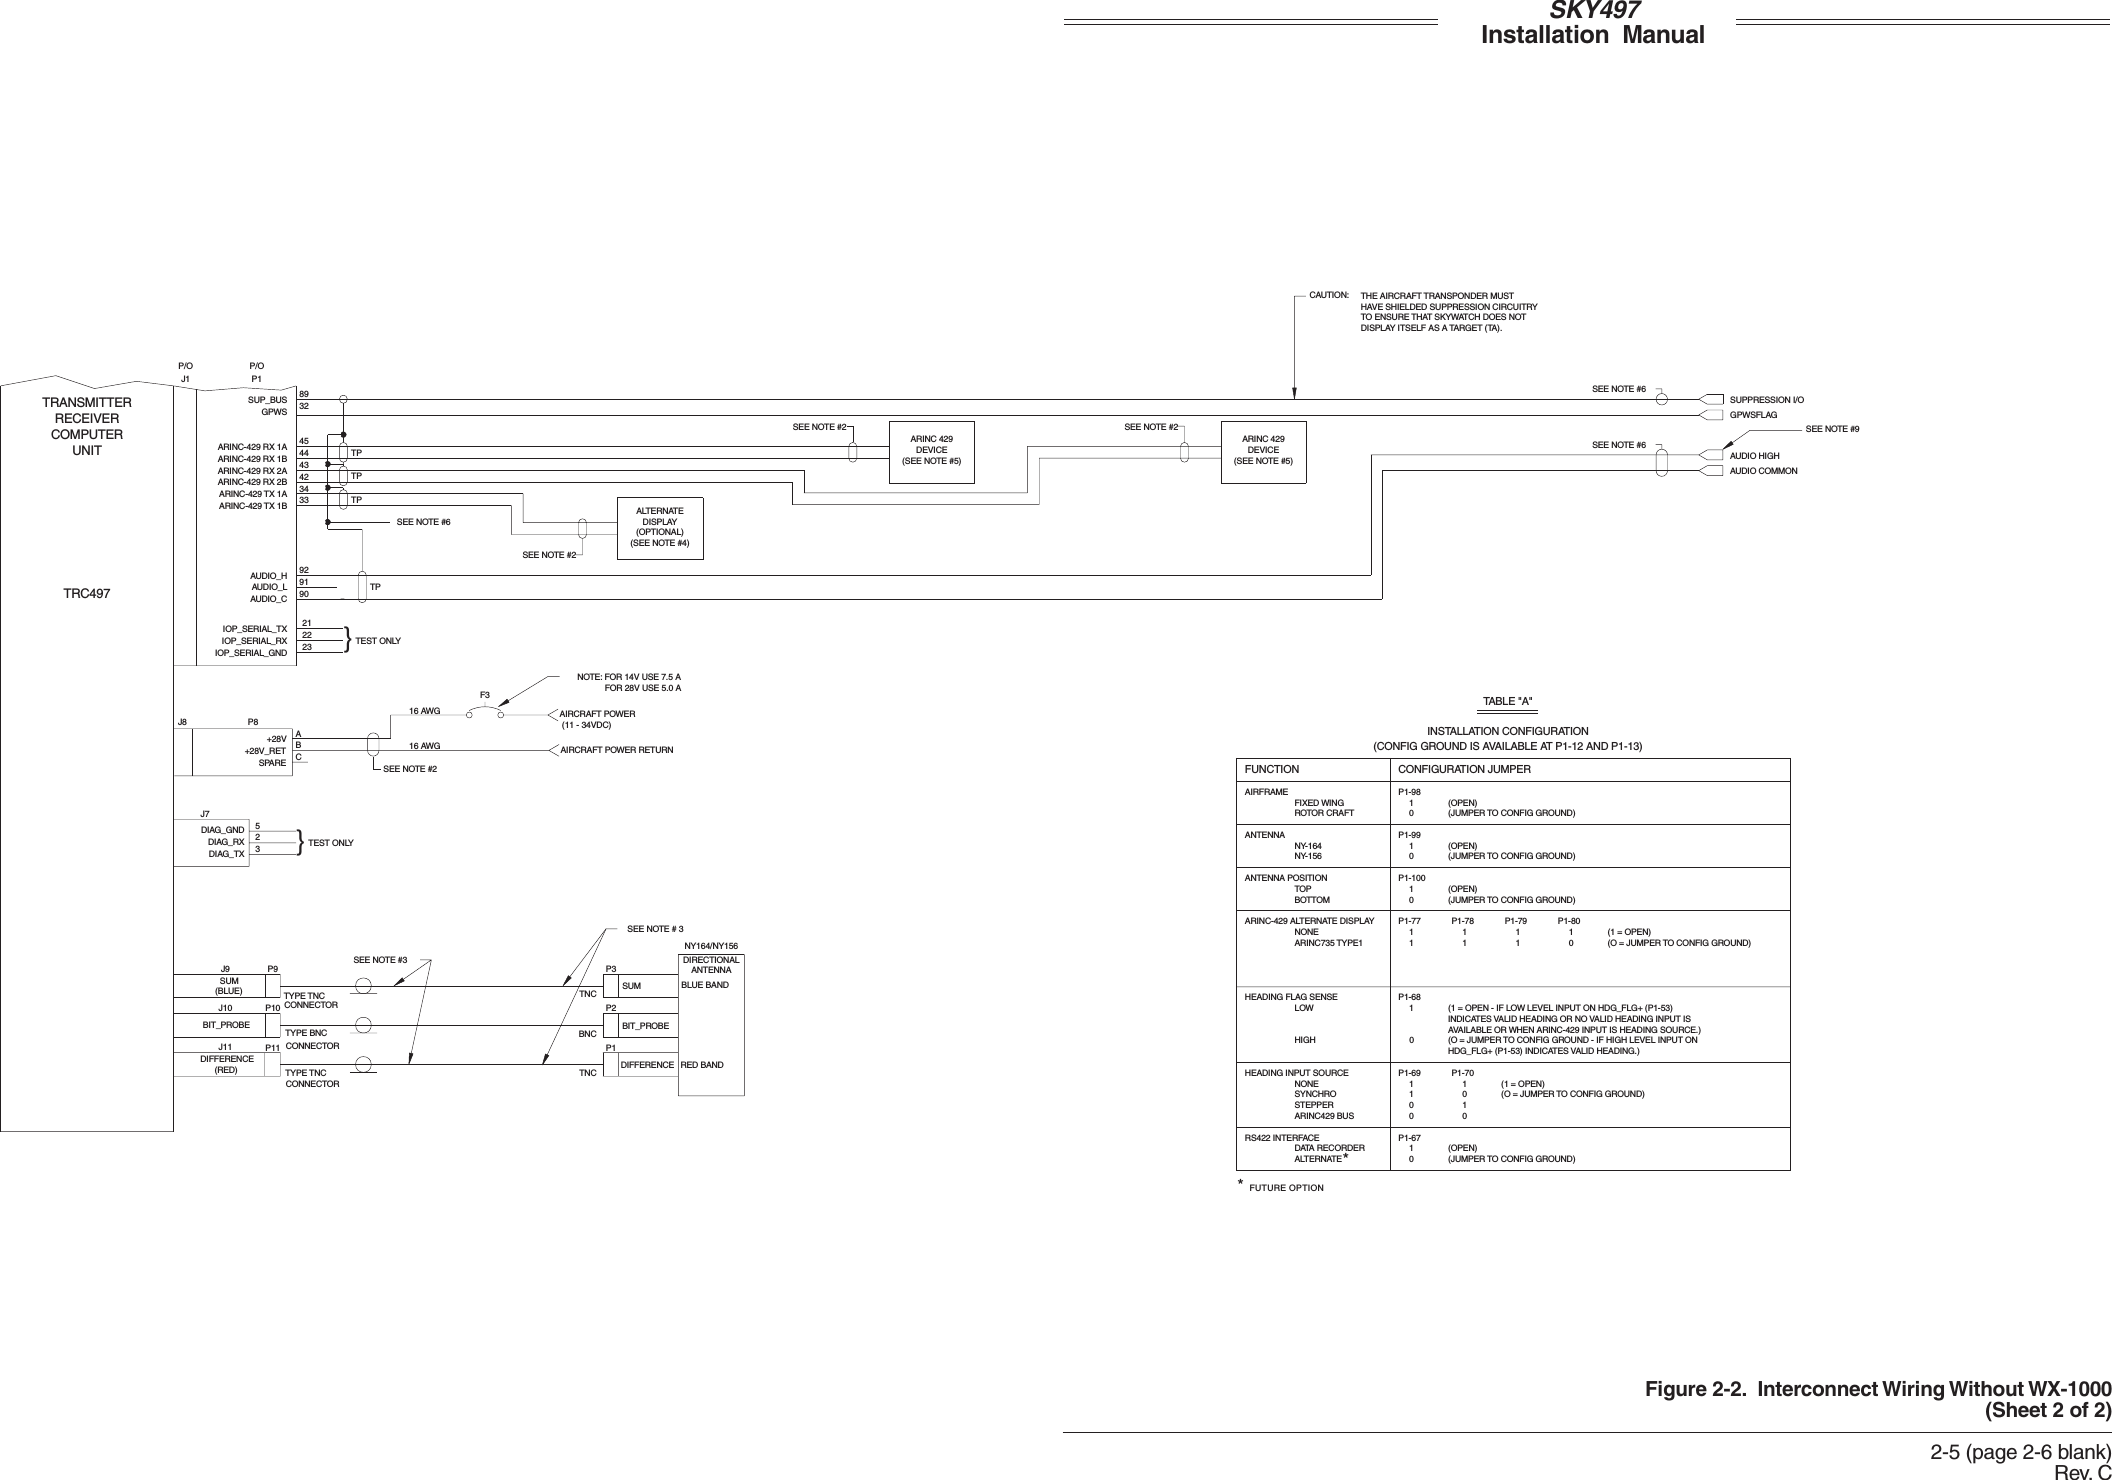 SKY497Installation ManualFigure 2-2. Interconnect Wiring Without WX-1000(Sheet 2 of 2)2-5 (page 2-6 blank)Rev. CF3J11J7TYPE TNCDIAG_GNDDIAG_RXDIAG_TX523}TRANSMITTERRECEIVERCOMPUTERUNITJ8 P8+28VSPARE+28V_RETAIRCRAFT POWERABC16 AWGCONNECTORTRC497J10DIFFERENCEJ9SUMCONNECTORTYPE TNCCONNECTORTYPE BNCTEST ONLYSUMDIFFERENCEBLUE BANDRED BANDDIRECTIONALANTENNASEE NOTE # 3TNCBNCTNCP9P10P11 P1P2P3AIRCRAFT POWER RETURNSEE NOTE #2BIT_PROBE BIT_PROBESEE NOTE #316 AWG(11 - 34VDC)NY164/NY156TEST ONLY}232221IOP_SERIAL_TXIOP_SERIAL_GNDIOP_SERIAL_RXNOTE: FOR 14V USE 7.5 AFOR 28V USE 5.0 ASUPPRESSION I/OAUDIO COMMONSEE NOTE #6AUDIO HIGHSEE NOTE #2SEE NOTE #6TPTPTP3233344243444589GPWSARINC-429 TX 1BARINC-429 TX 1AARINC-429 RX 2BARINC-429 RX 2AARINC-429 RX 1BARINC-429 RX 1ASUP_BUSSEE NOTE #2ARINC 429DEVICE(SEE NOTE #5)(SEE NOTE #5)DEVICEARINC 429GPWSFLAGTP90AUDIO_C91AUDIO_L92AUDIO_HJ1 P1P/O P/OFUNCTIONAIRFRAMEFIXED WINGROTOR CRAFTCONFIGURATION JUMPERP1-98(OPEN)(JUMPER TO CONFIG GROUND)10ANTENNANY-164NY-156P1-9910(OPEN)(JUMPER TO CONFIG GROUND)ANTENNA POSITIONTOPBOTTOMARINC-429 ALTERNATE DISPLAYNONEARINC735 TYPE1P1-10010(OPEN)(JUMPER TO CONFIG GROUND)P1-7711(1 = OPEN)(O = JUMPER TO CONFIG GROUND)P1-7811P1-7911P1-8010HEADING INPUT SOURCENONESYNCHROP1-69 P1-701011 (1 = OPEN)(O = JUMPER TO CONFIG GROUND)STEPPER 0 1ARINC429 BUS 0 0(JUMPER TO CONFIG GROUND)(OPEN)01P1-67ALTERNATEDATA RECORDERRS422 INTERFACE*(CONFIG GROUND IS AVAILABLE AT P1-12 AND P1-13)TABLE &quot;A&quot;*FUTURE OPTIONHDG_FLG+ (P1-53) INDICATES VALID HEADING.)(1 = OPEN - IF LOW LEVEL INPUT ON HDG_FLG+ (P1-53)HEADING FLAG SENSELOWP1-681INDICATES VALID HEADING OR NO VALID HEADING INPUT ISAVAILABLE OR WHEN ARINC-429 INPUT IS HEADING SOURCE.)HIGH 0 (O = JUMPER TO CONFIG GROUND - IF HIGH LEVEL INPUT ON(RED)(BLUE)CAUTION: THE AIRCRAFT TRANSPONDER MUSTHAVE SHIELDED SUPPRESSION CIRCUITRYTO ENSURE THAT SKYWATCH DOES NOTDISPLAY ITSELF AS A TARGET (TA).INSTALLATION CONFIGURATION(OPTIONAL)ALTERNATEDISPLAY(SEE NOTE #4)SEE NOTE #2SEE NOTE #6SEE NOTE #9